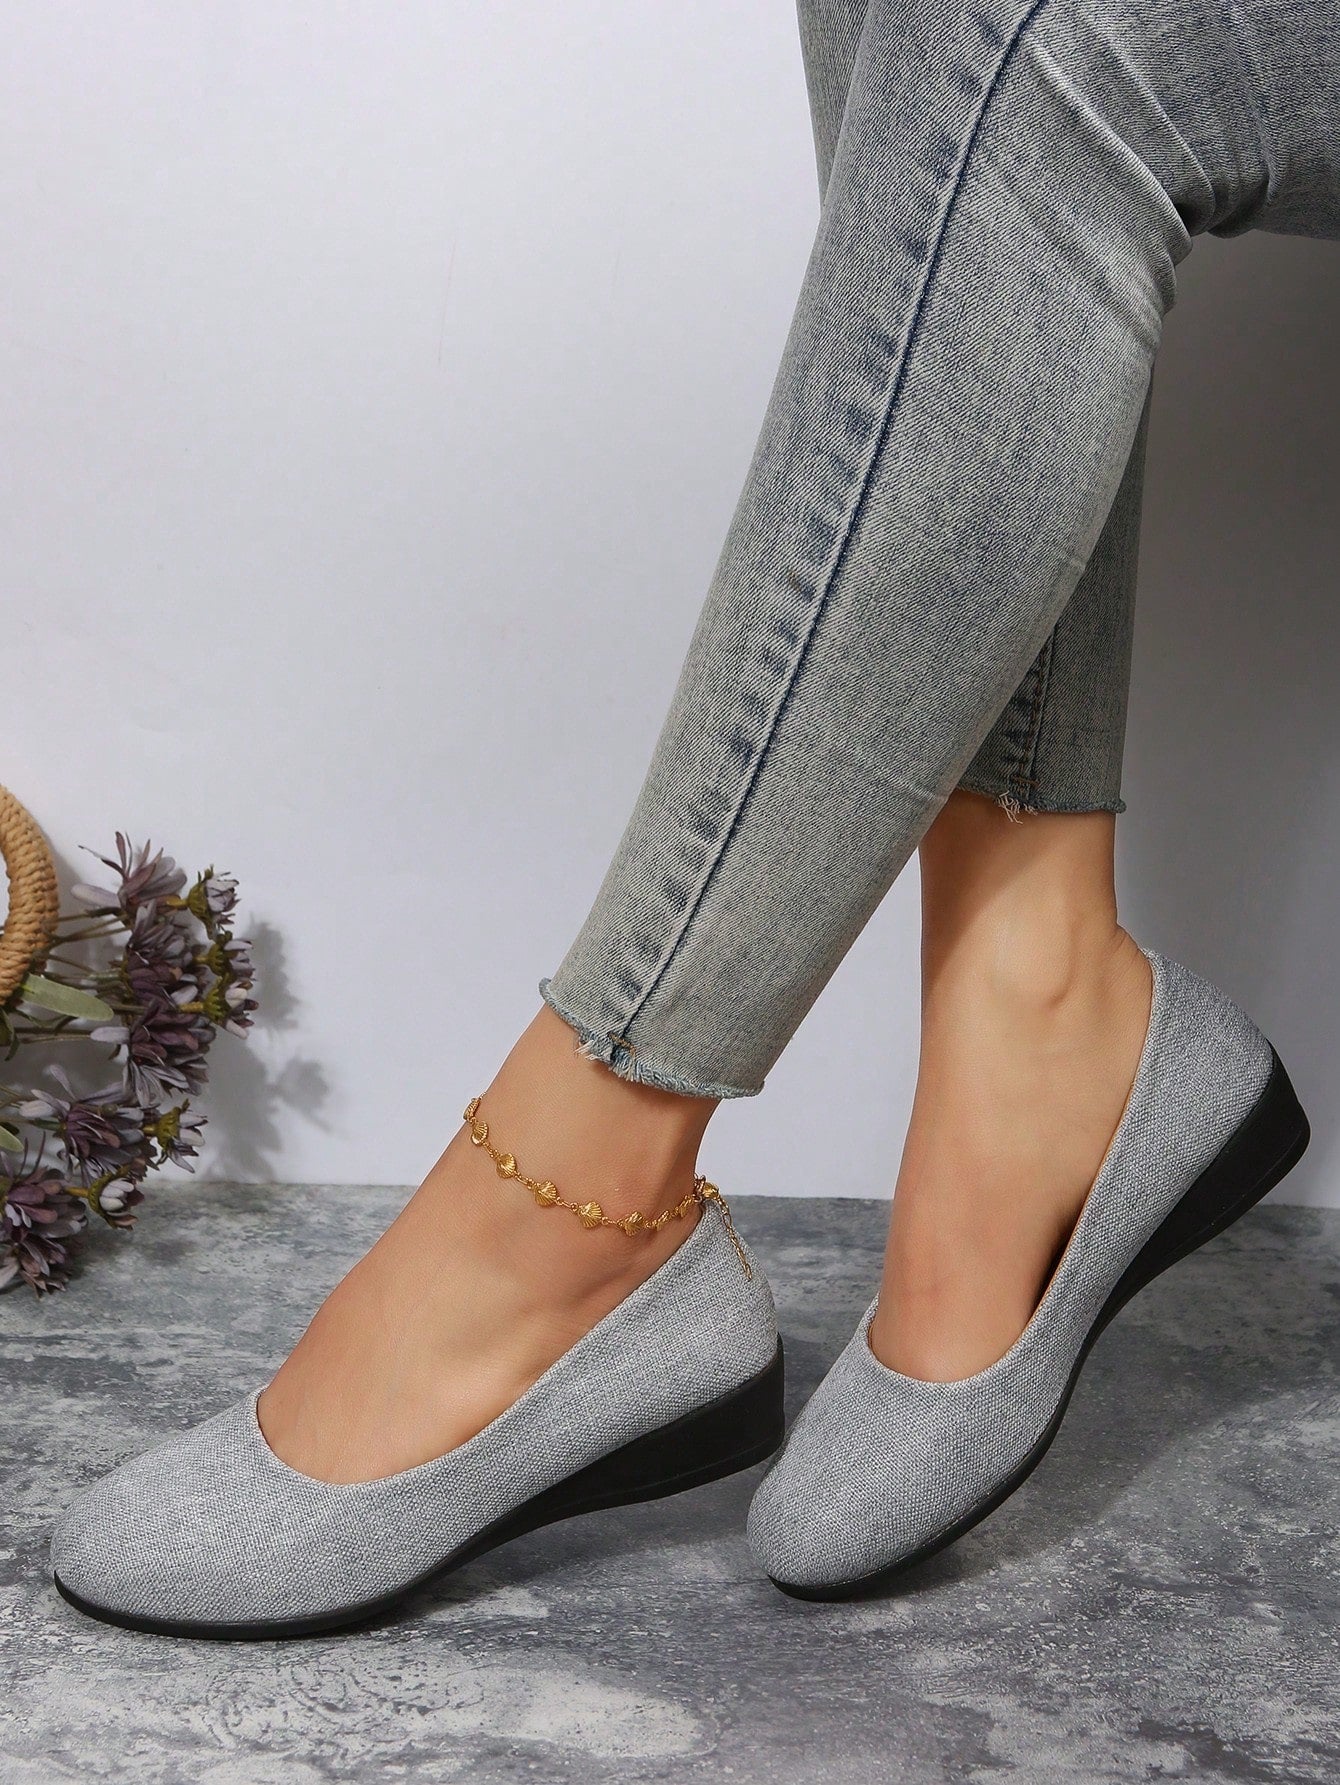 Women Fashionable Classic Comfortable Casual Small Wedge Heel Backstrap Flat Mom Shoes, Suitable For Any Occasion-Grey-2